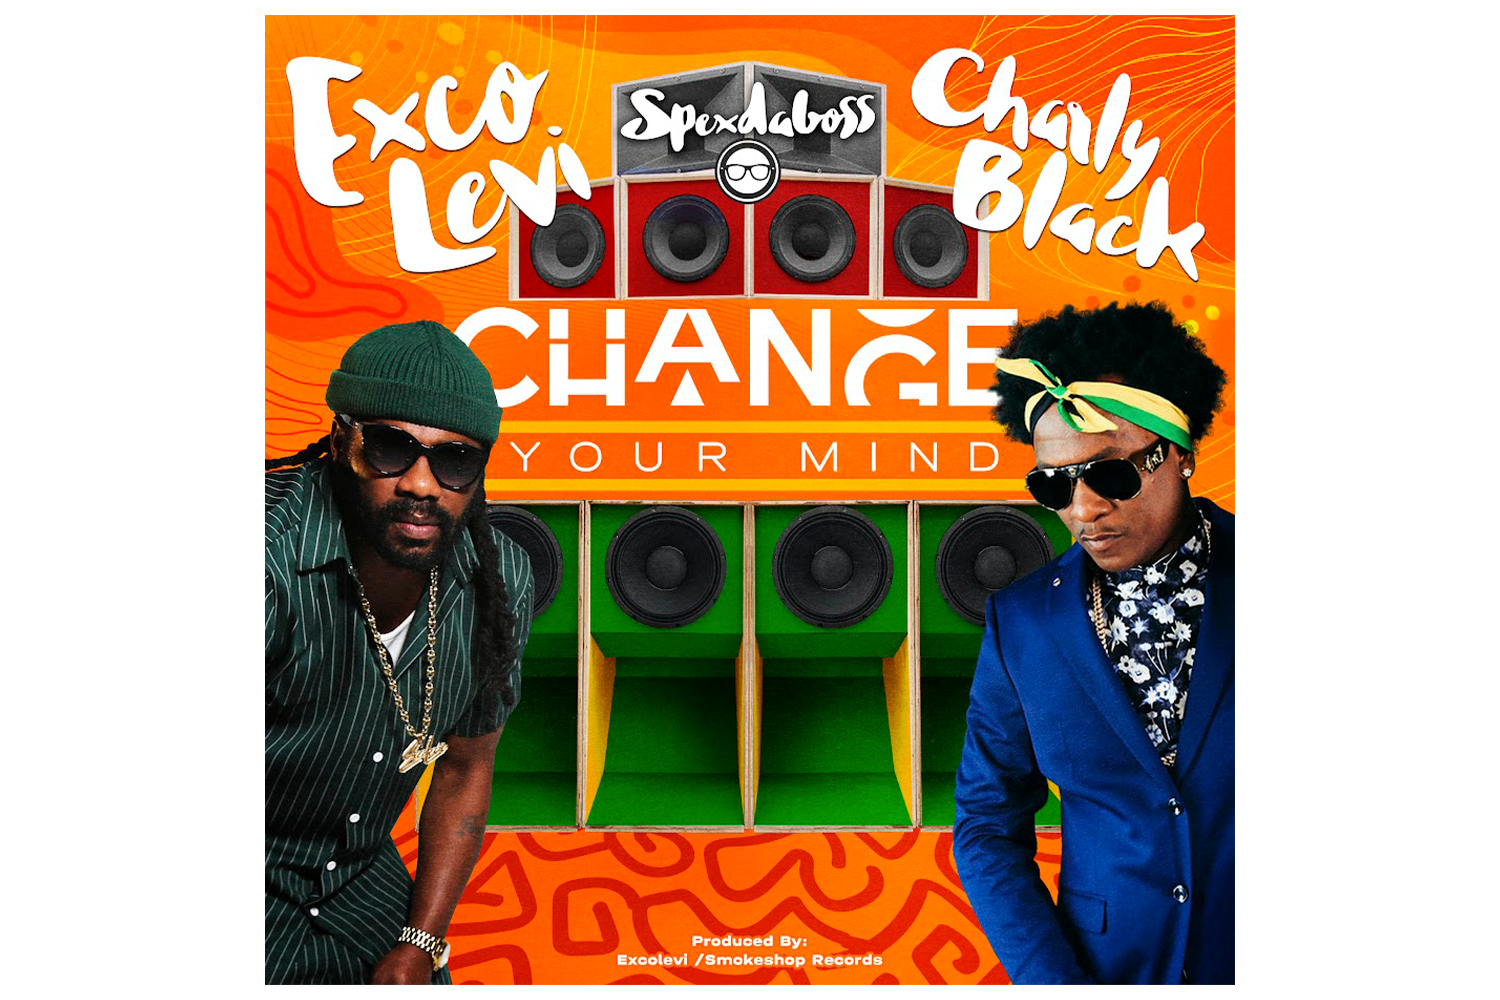 Exco Levi, Charly Black, and DJ Spexdaboss Collab on the Ultimate Summer  Anthem – Reggae North